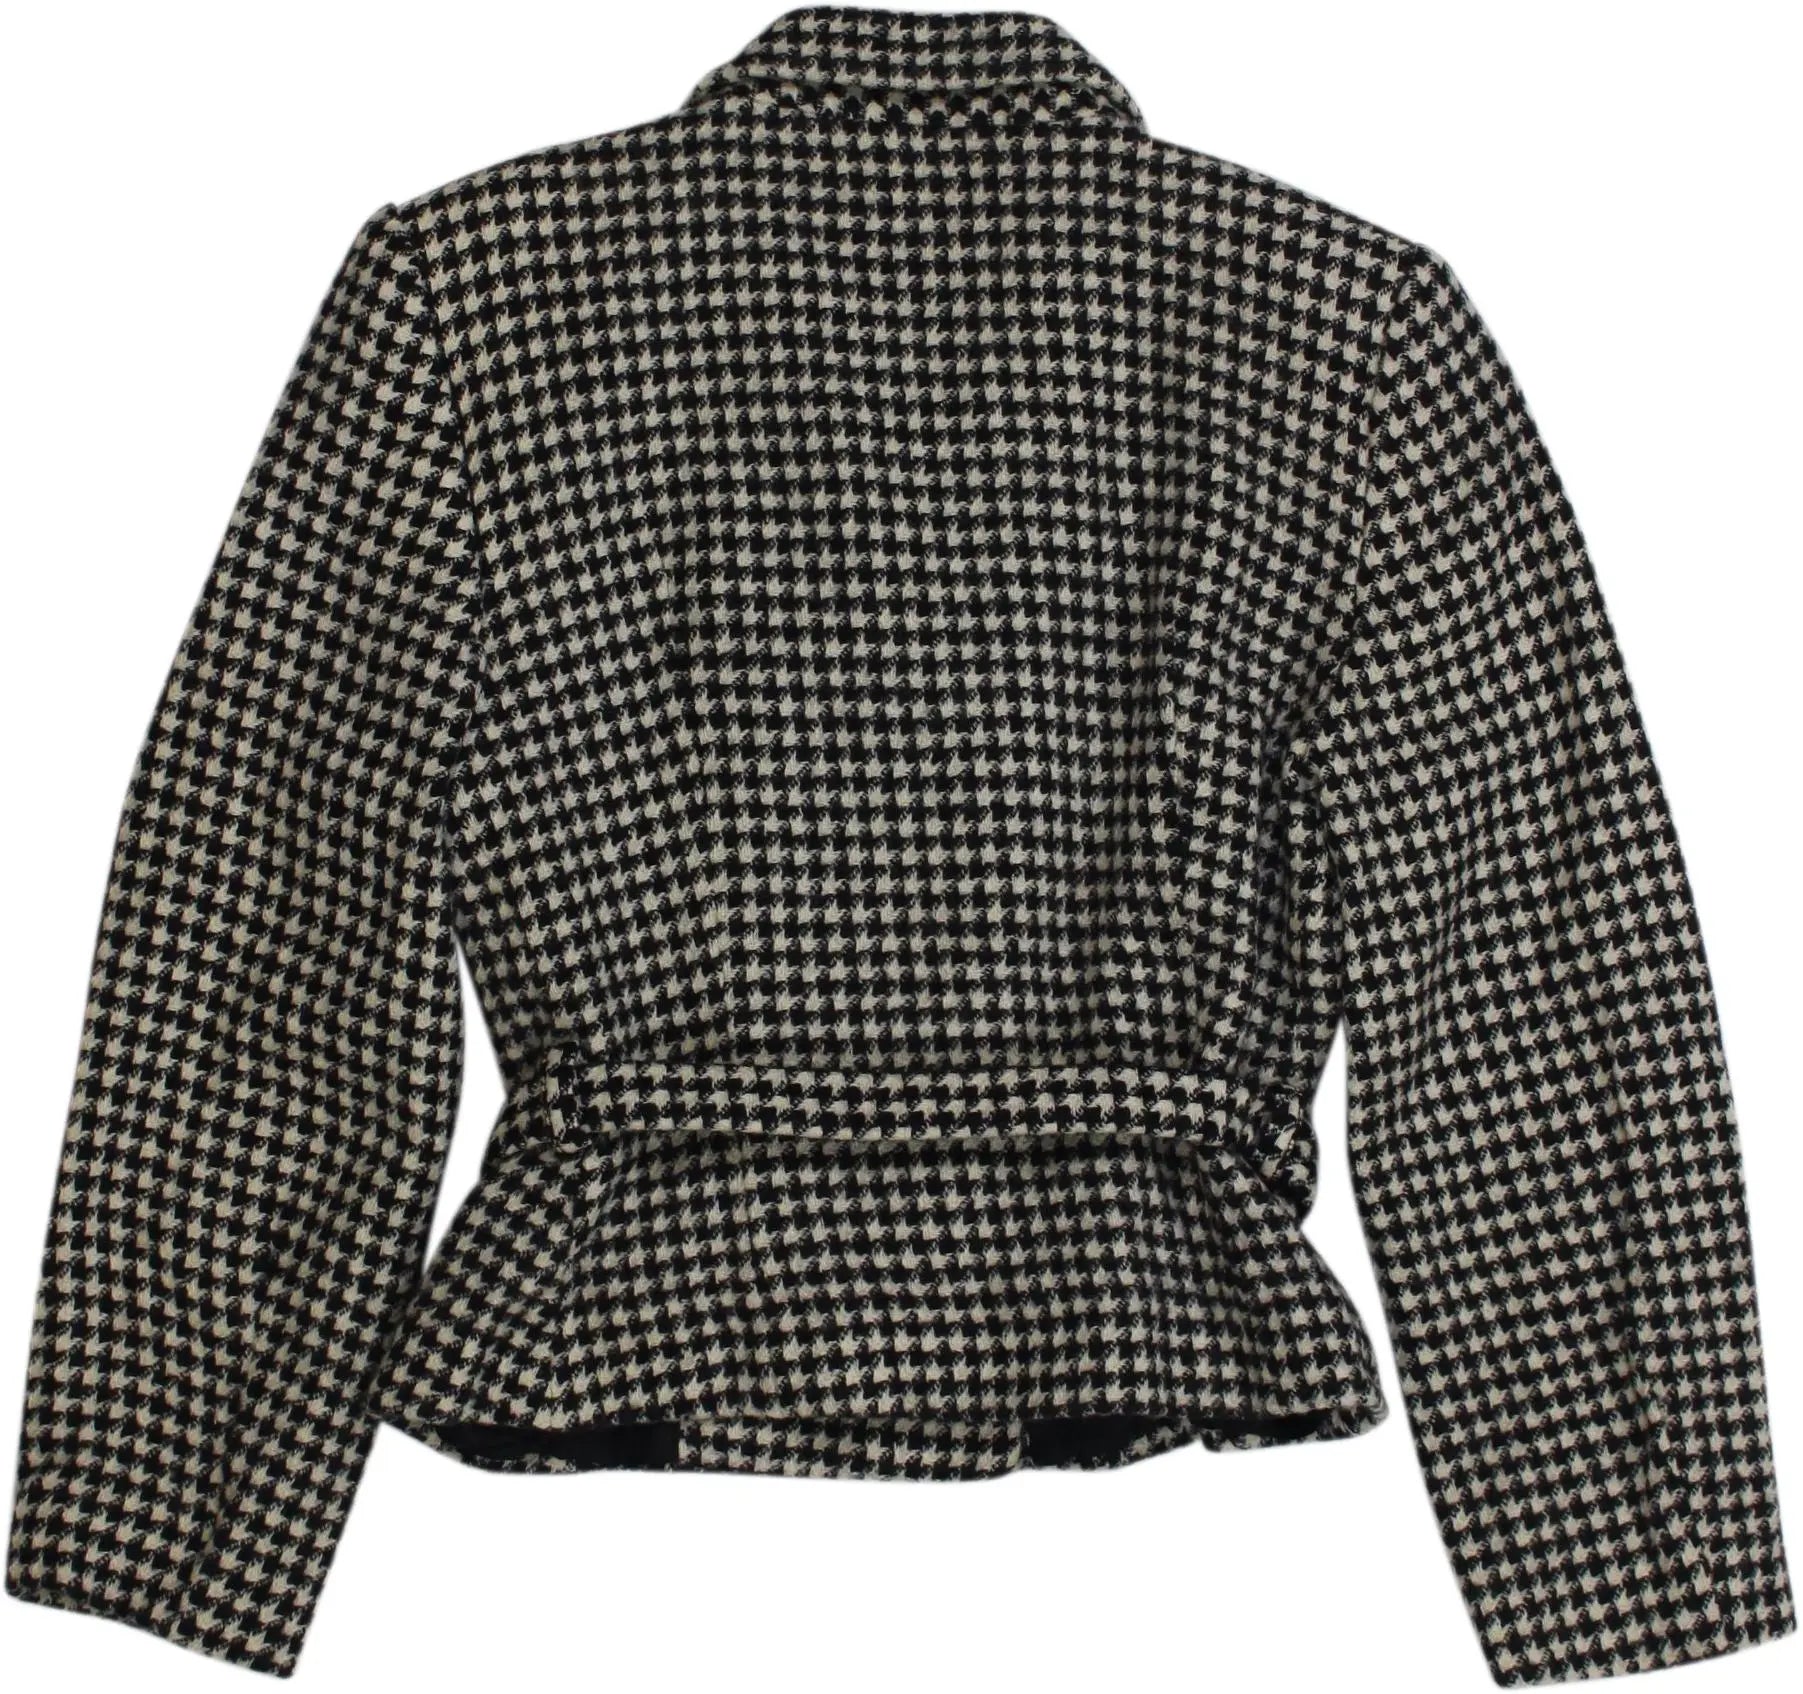 Byblos - Checked Blazer by Byblos- ThriftTale.com - Vintage and second handclothing